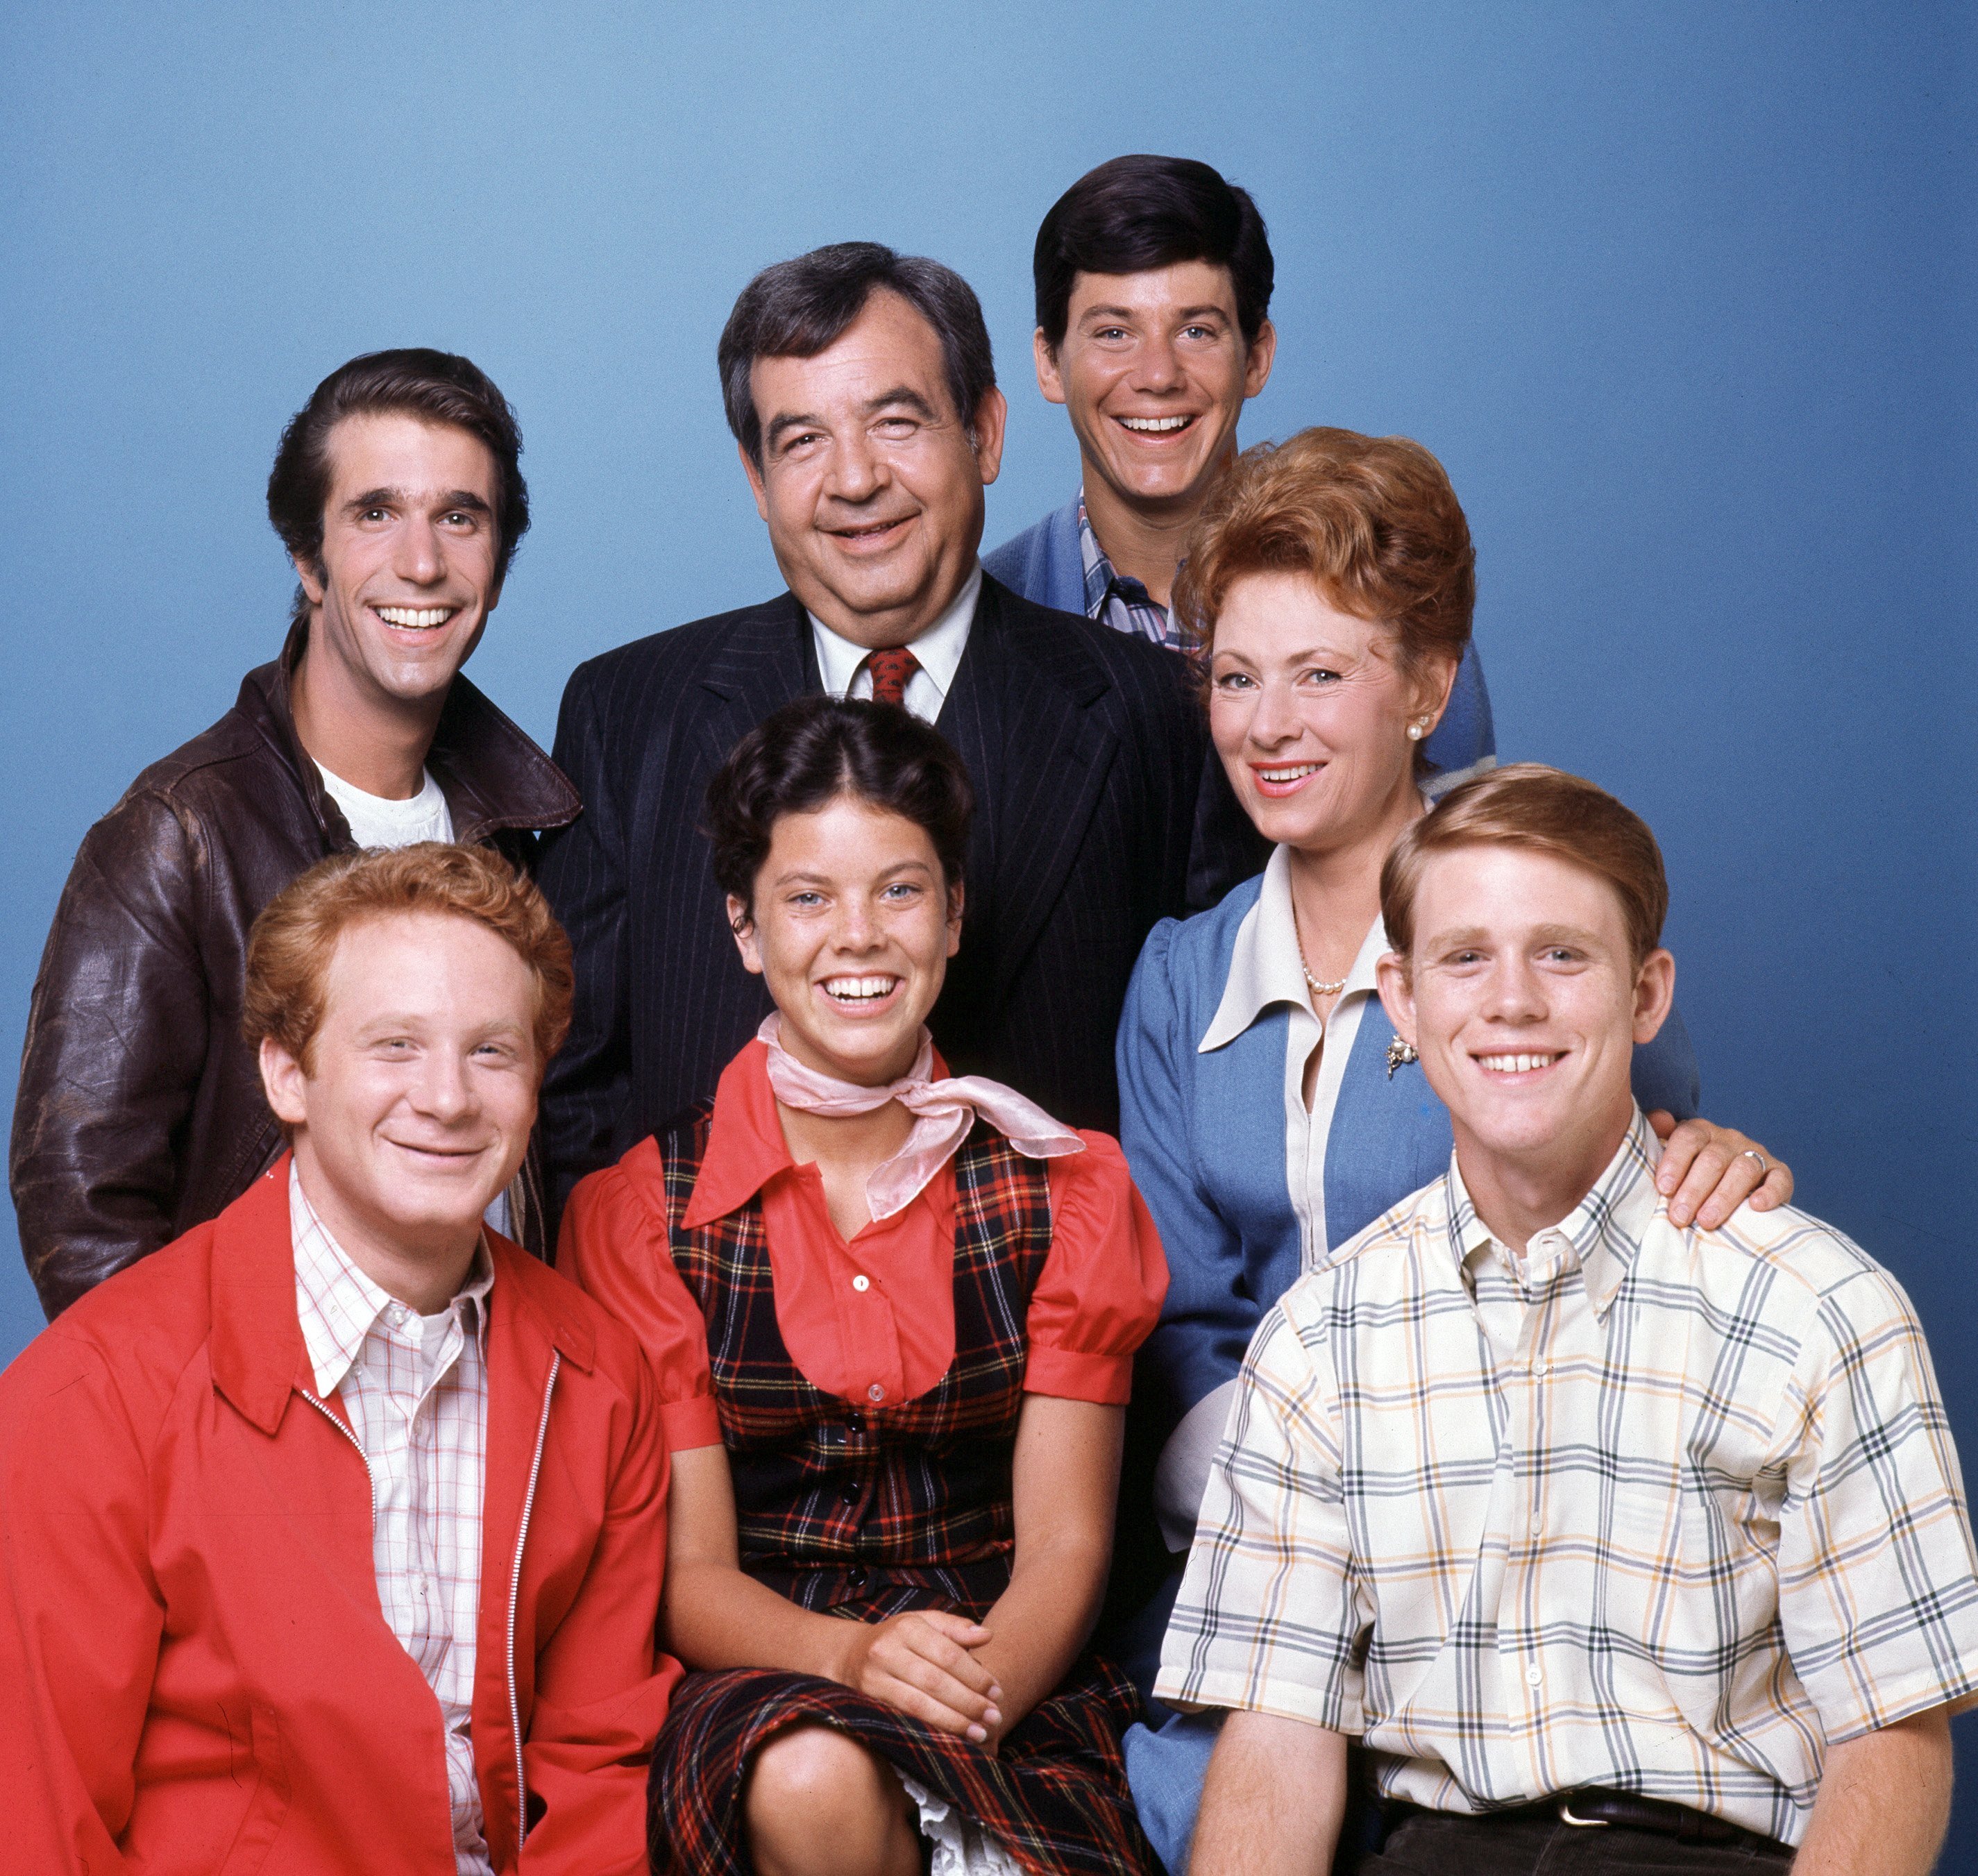 The cast of 'Happy Days', 1975